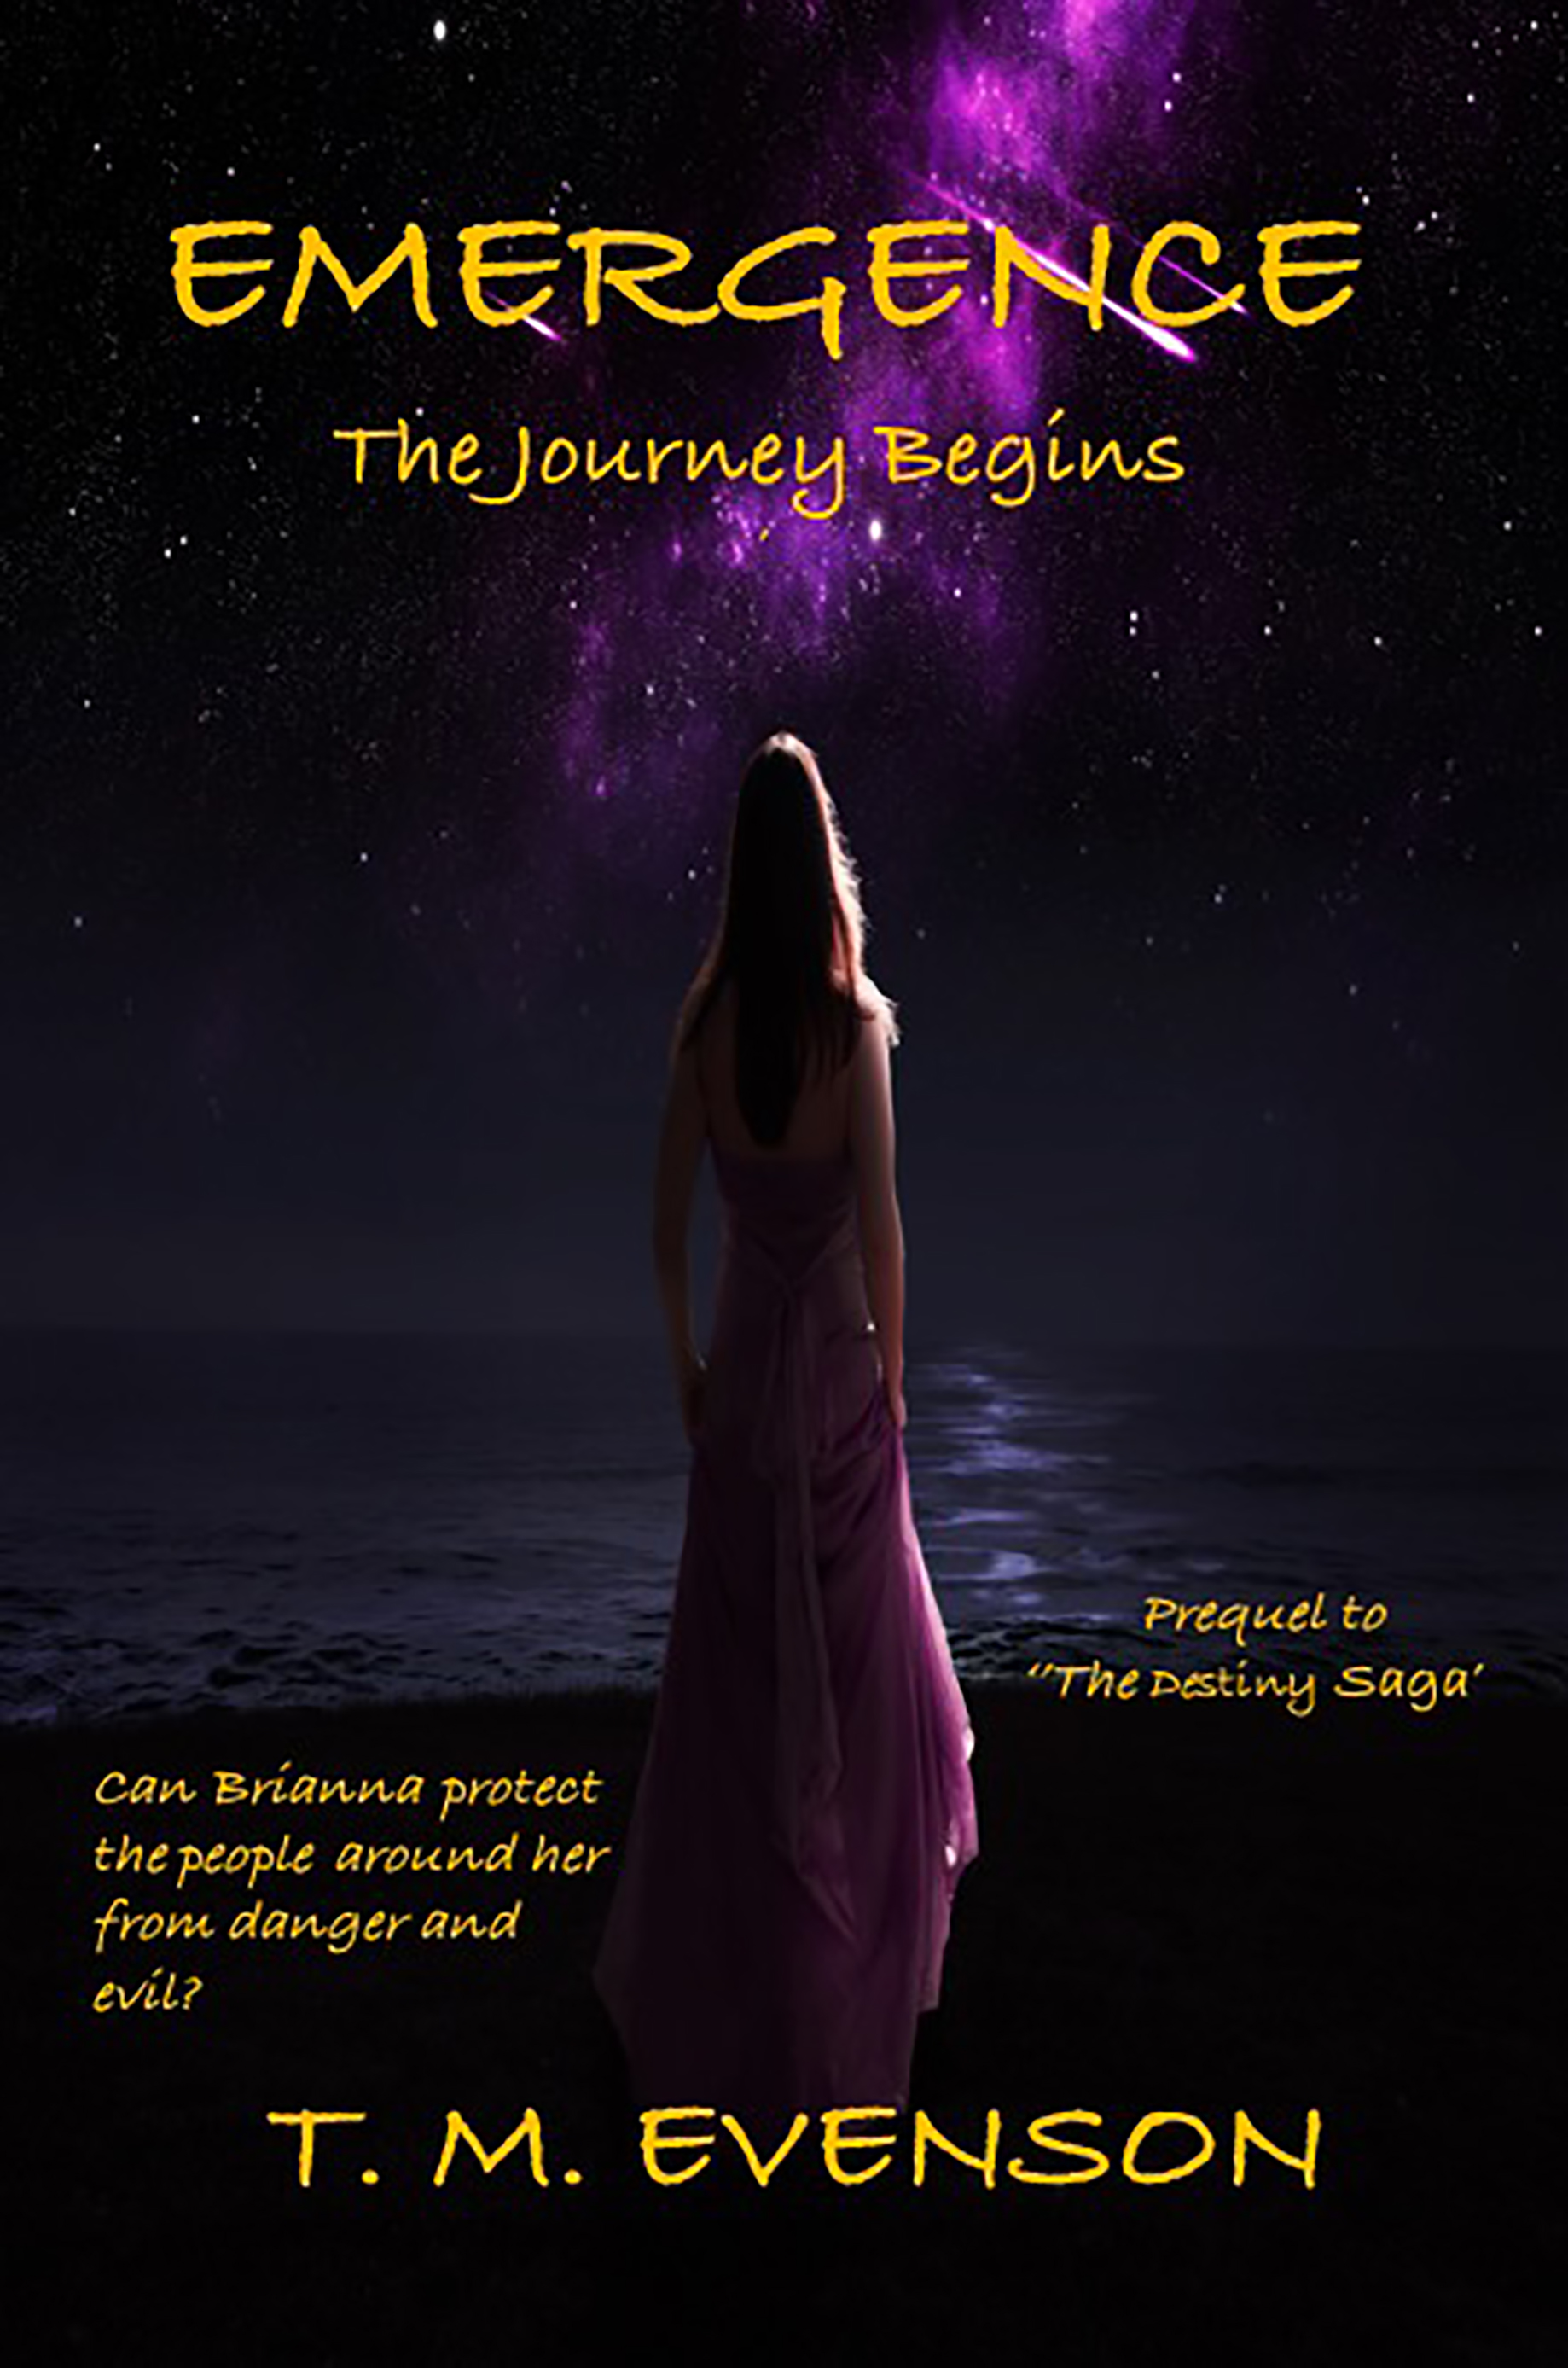 EMERGENCE: The Journey Begins (Prequel to The Destiny Saga) by T. M. Evenson